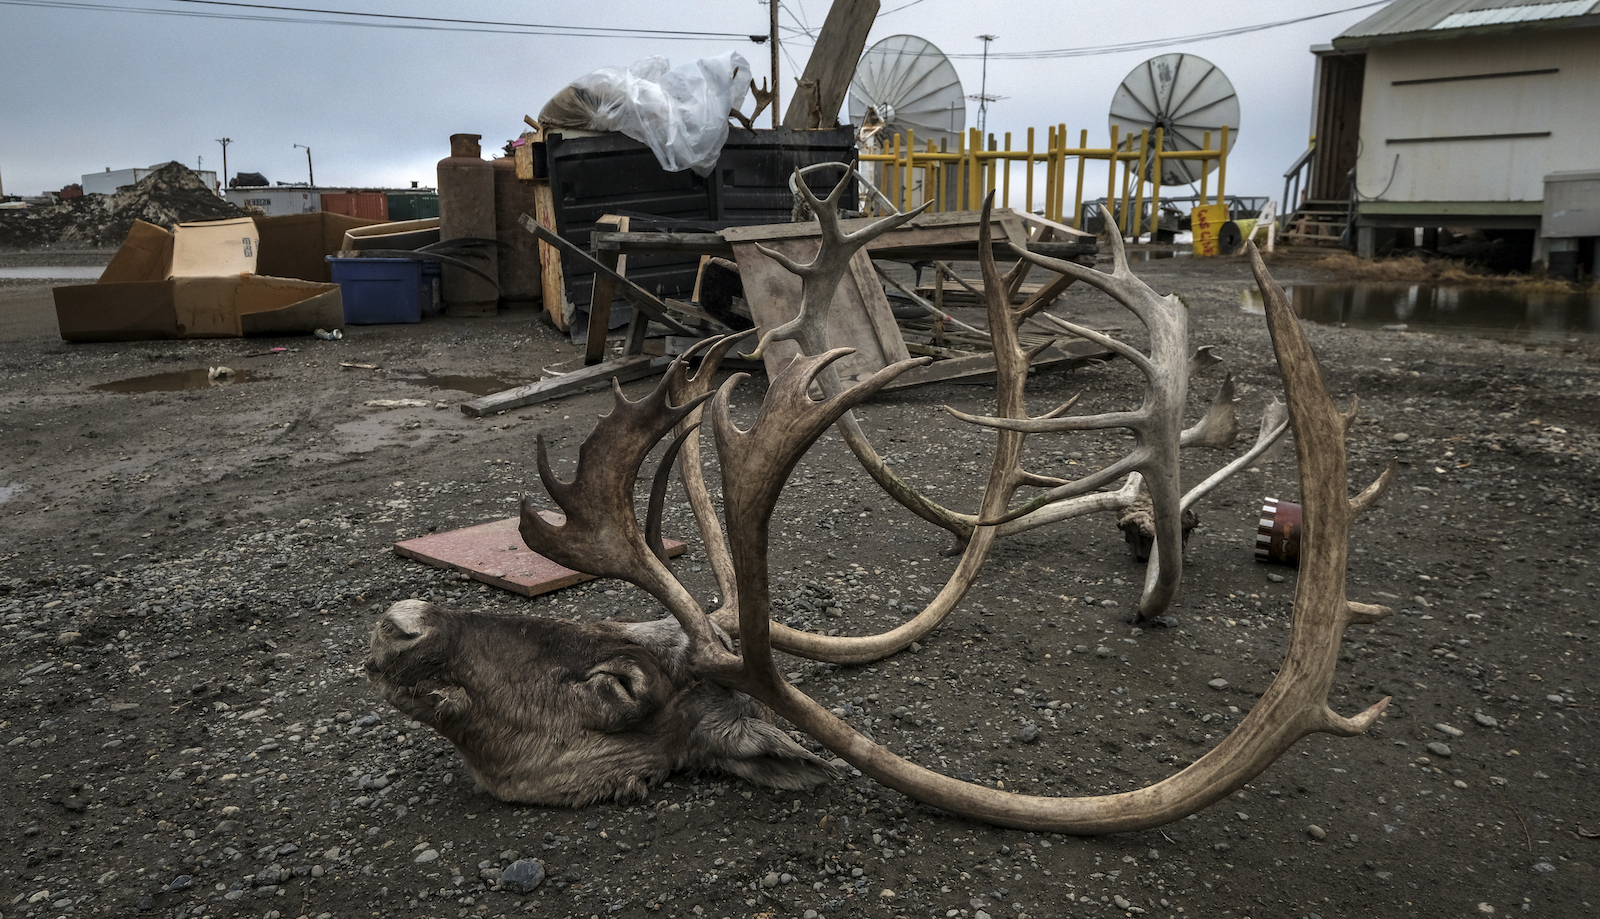 The head of a caribou sits outside a youth center with a dumpster and satellite dishes in the background